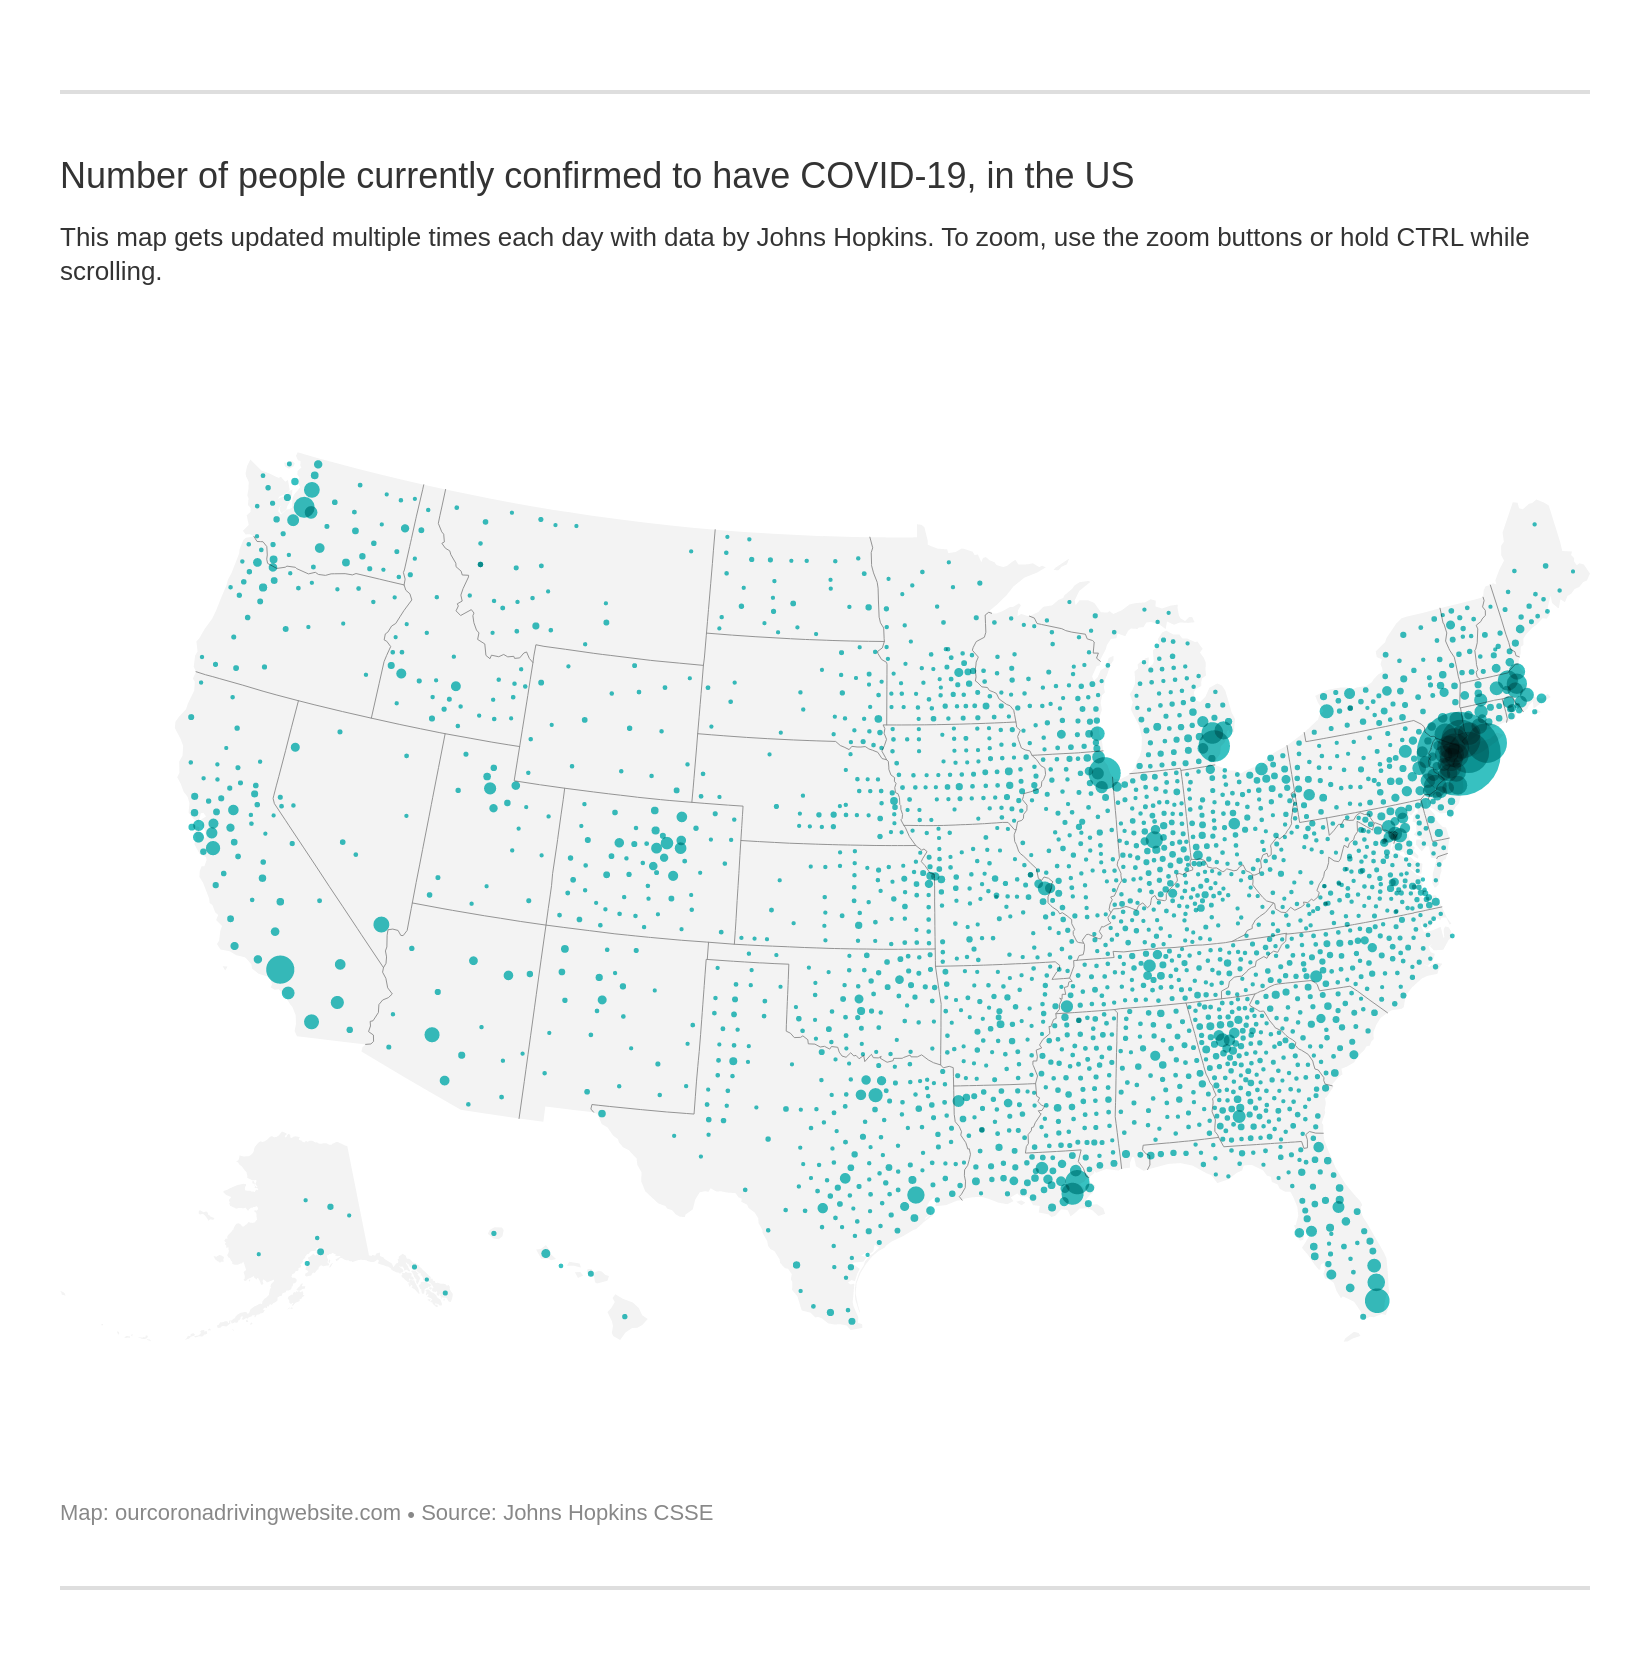 Number of people currently confirmed to have COVID-19, in the US